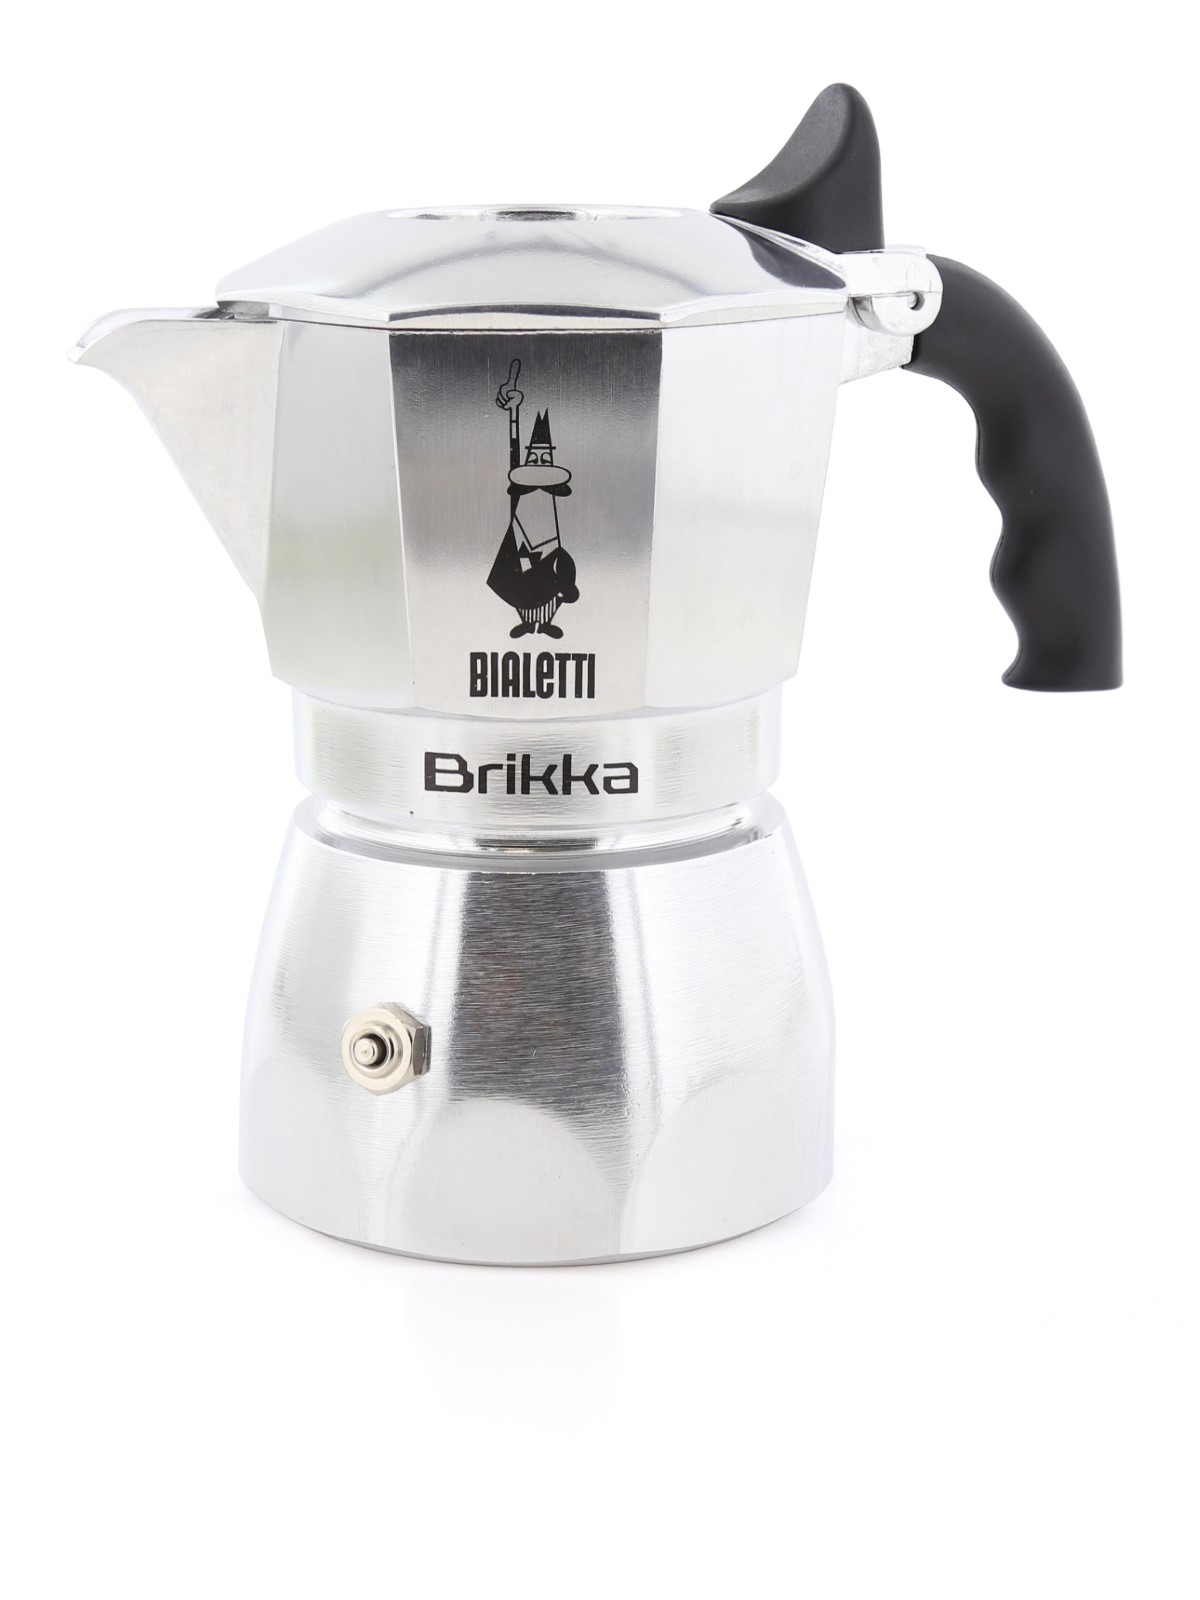 Bialetti Brikka Frothy Espresso Maker Silver 100ml (Makes 2 Cups)